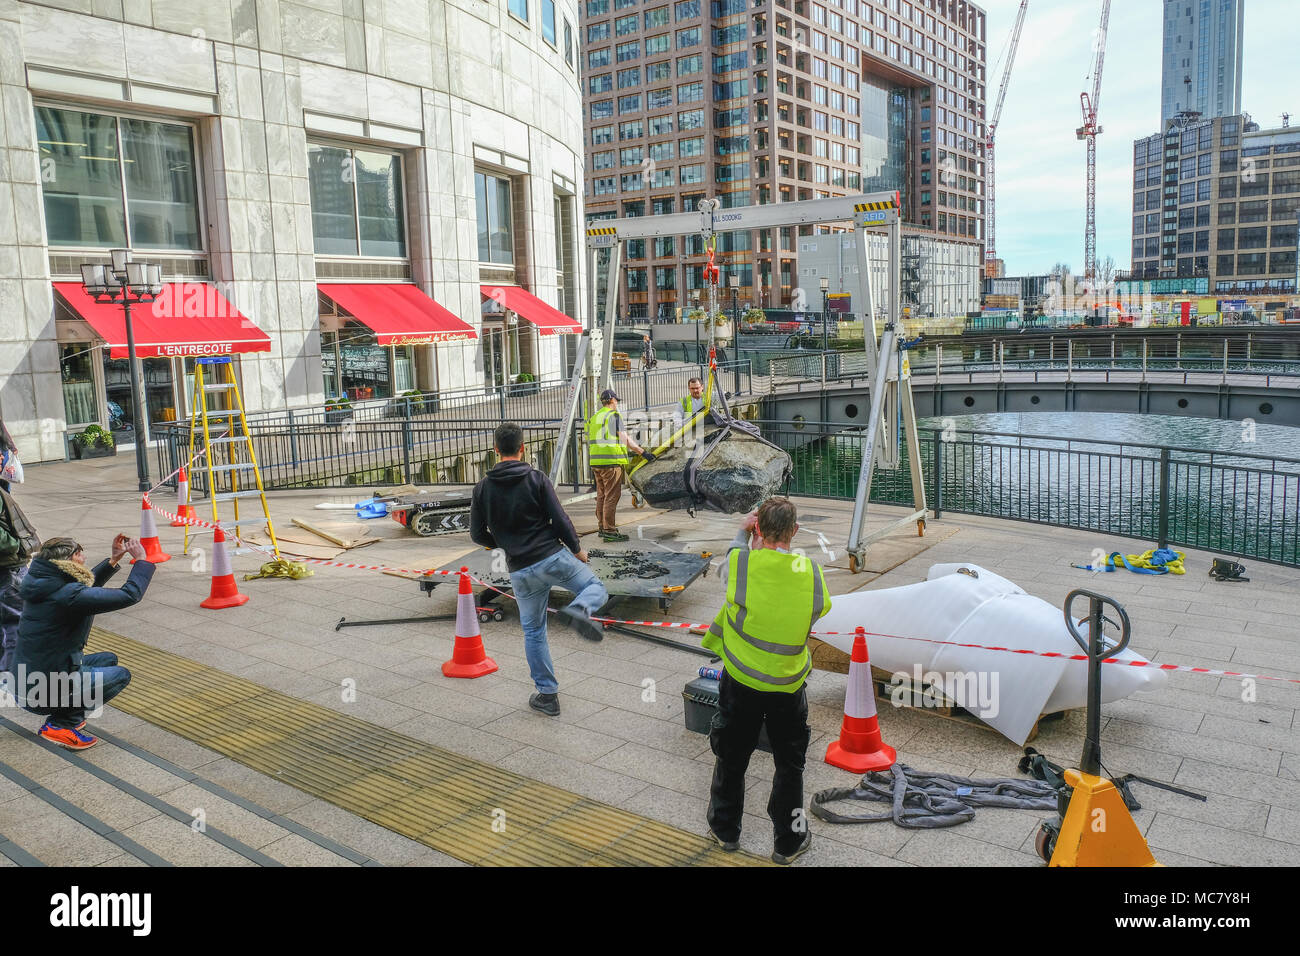 West India Quay, London, UK - March 26, 2017: Workmen in high viz jackets hoisting a large stone beside the water front. Stock Photo